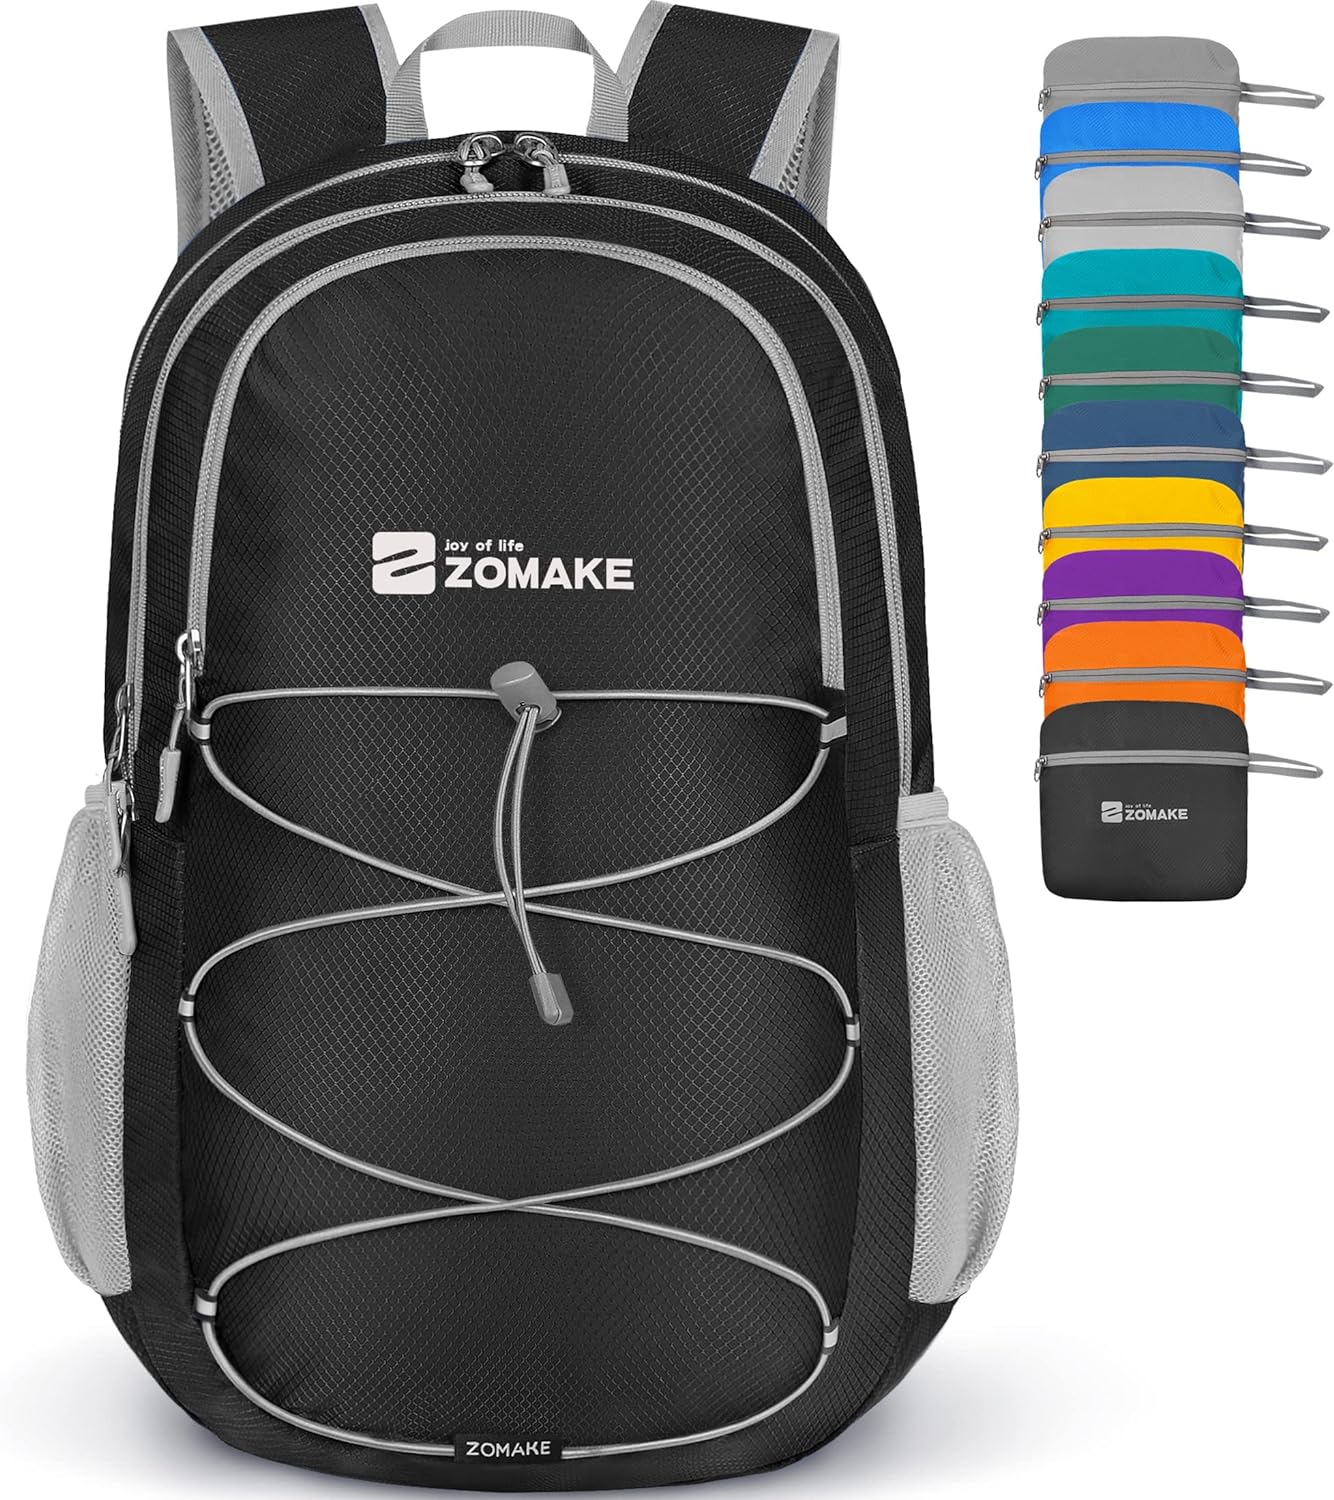 ZOMAKE 28L Small Packable Hiking Backpack - Lightweight Hiking Daypack - Water Resistant Foldable Day Pack for Camping